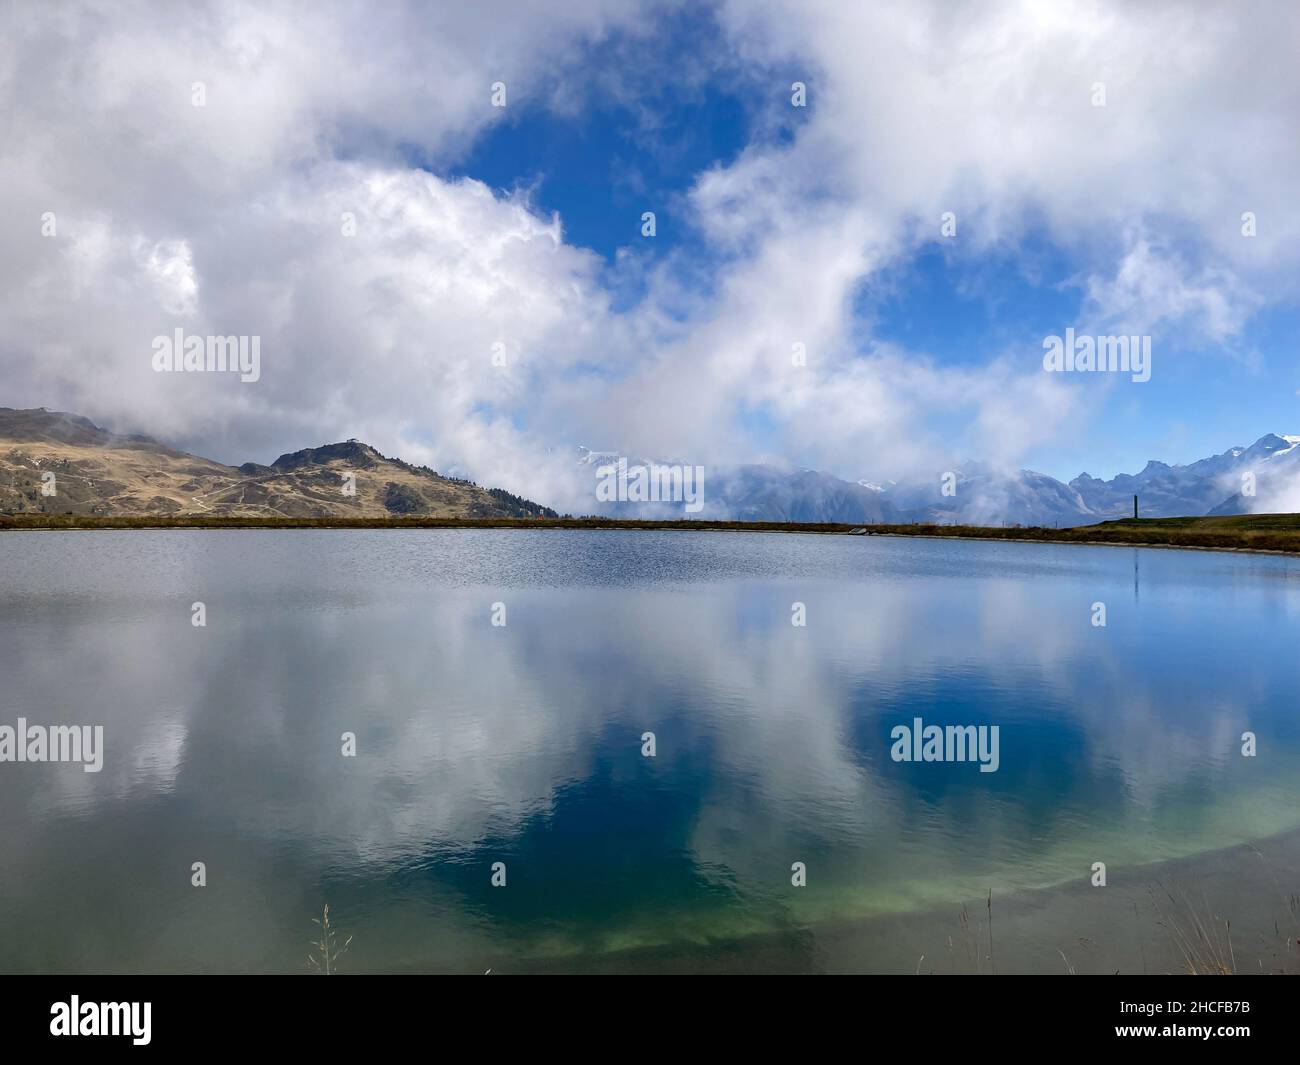 Blue Mountain Lake with Clouds above Bettmeralp, Aletsch Arena, Switzerland Stock Photo